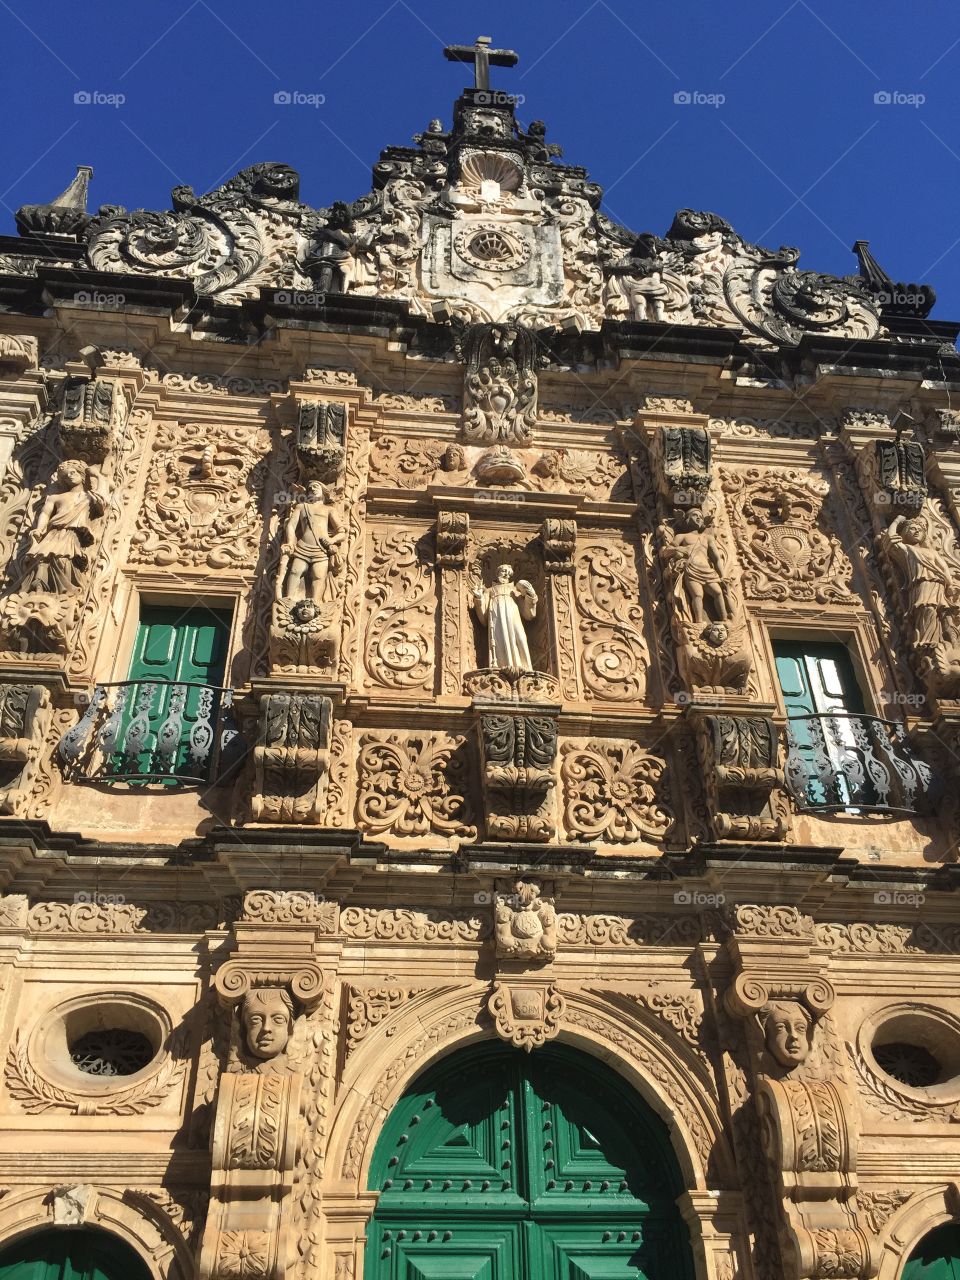 Incredible architecture in Salvador, Brazil, May 2015